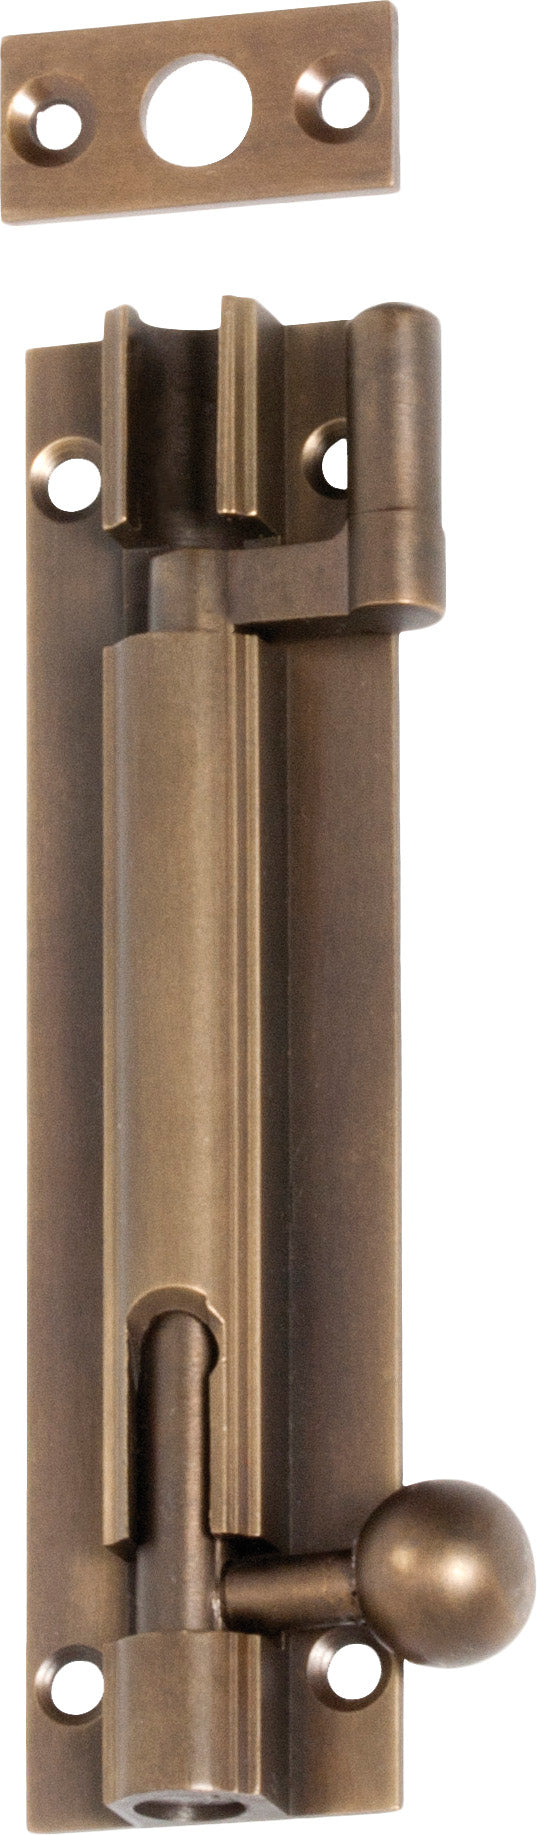 TRADCO BARREL BOLT OFFSET IN VARIOUS FINISHES AND SIZES